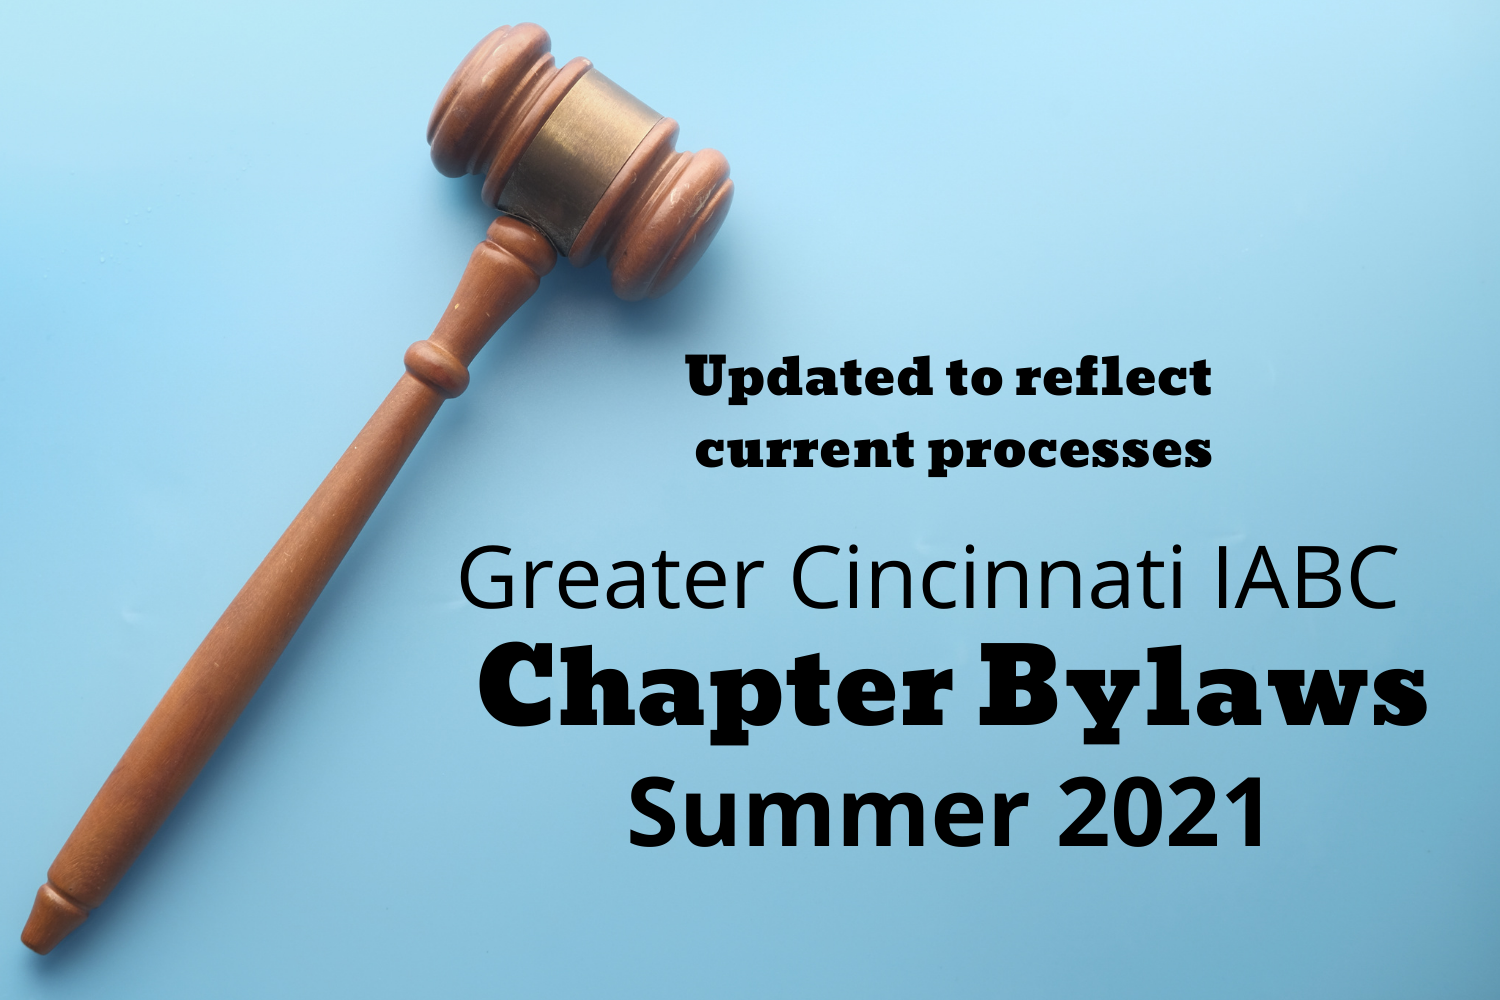 Proposed Revisions - Chapter Bylaw 